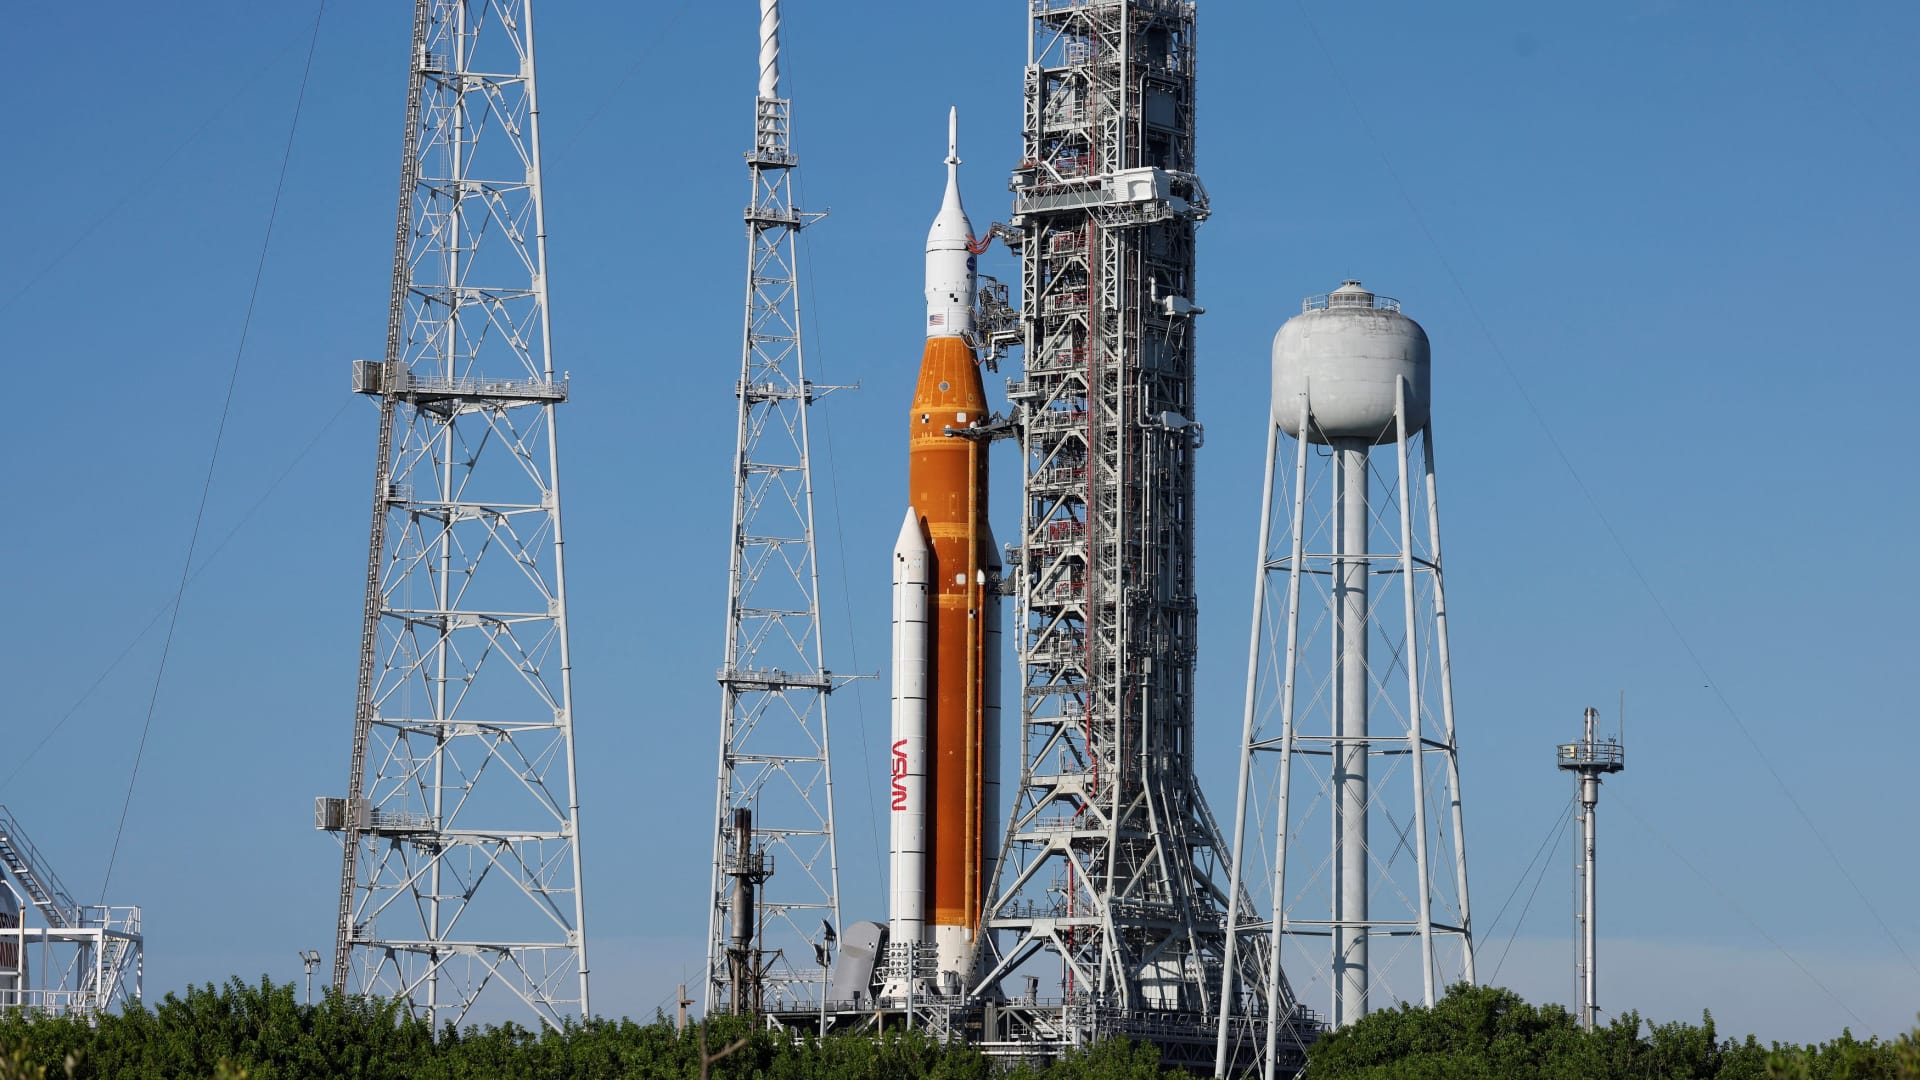 NASA’s next-generation moon rocket, the Space Launch System (SLS) rocket with its Orion crew capsule perched on top, as it stands on launch pad 39B in preparation for the unmanned Artemis 1 mission at Cape Canaveral, Florida, August 27, 2022.